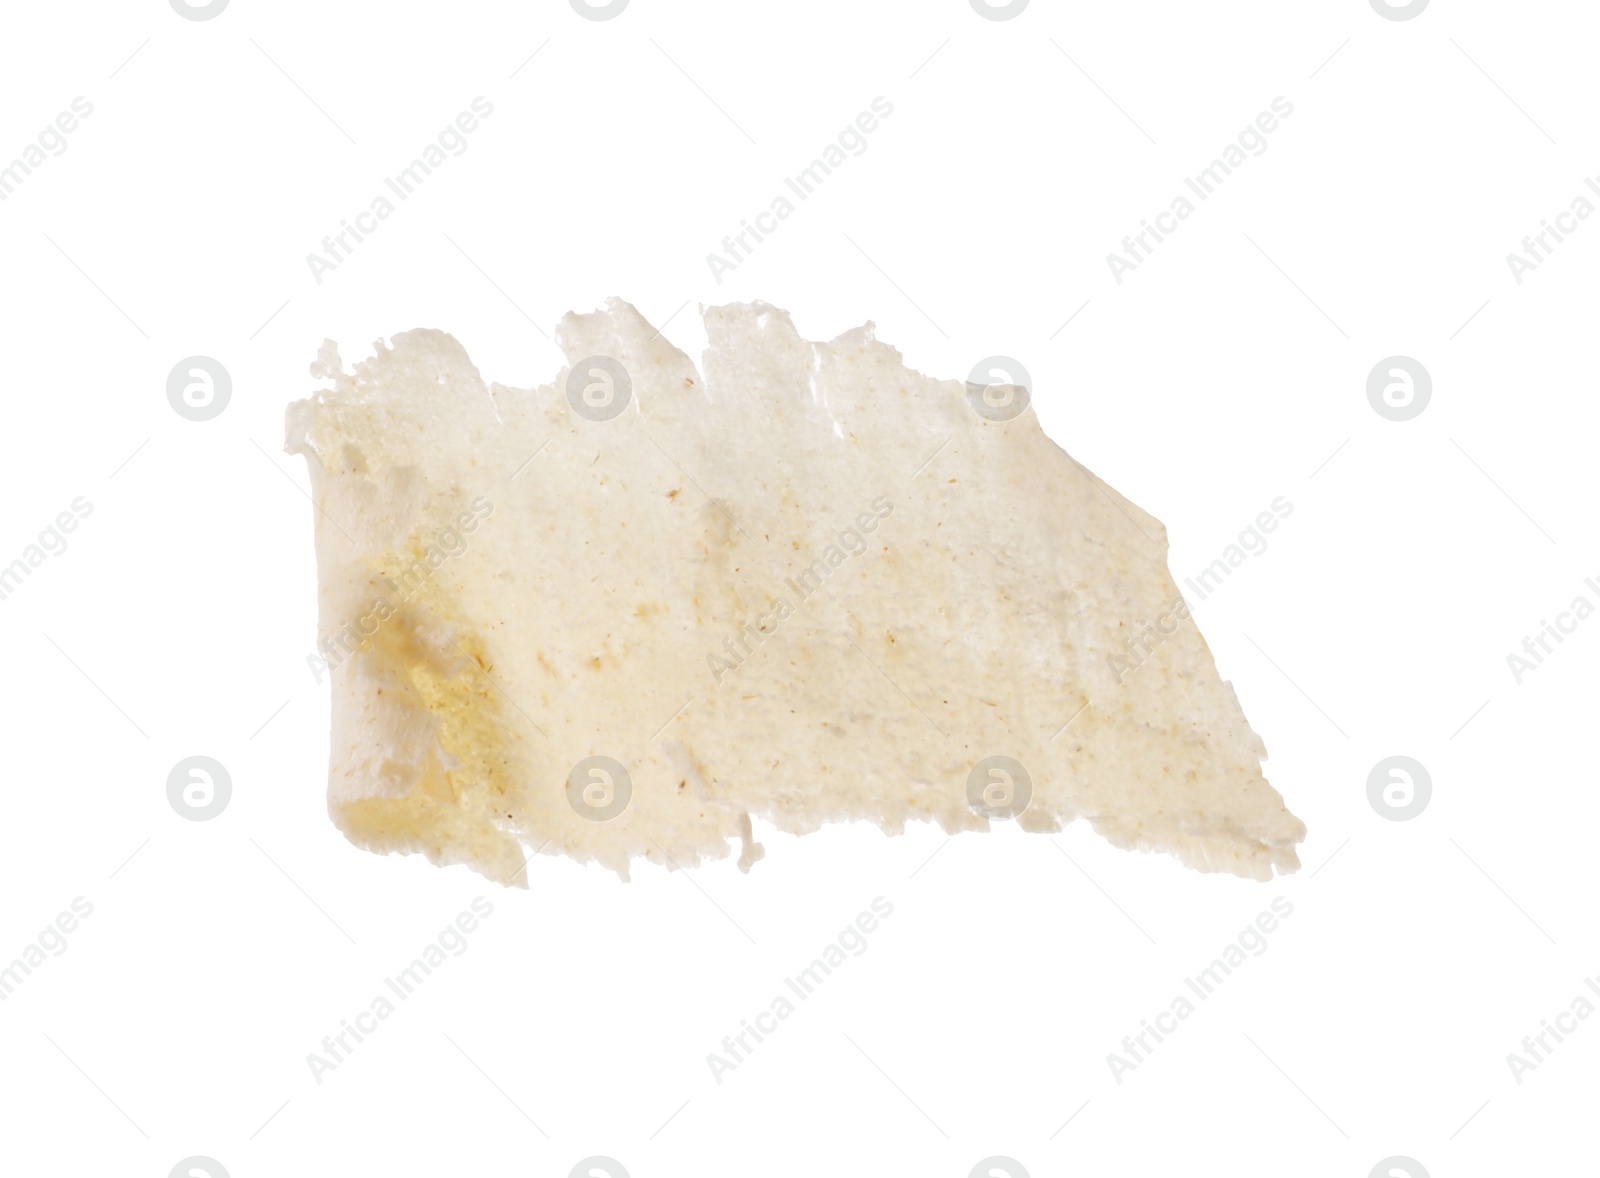 Photo of One chip of wood isolated on white